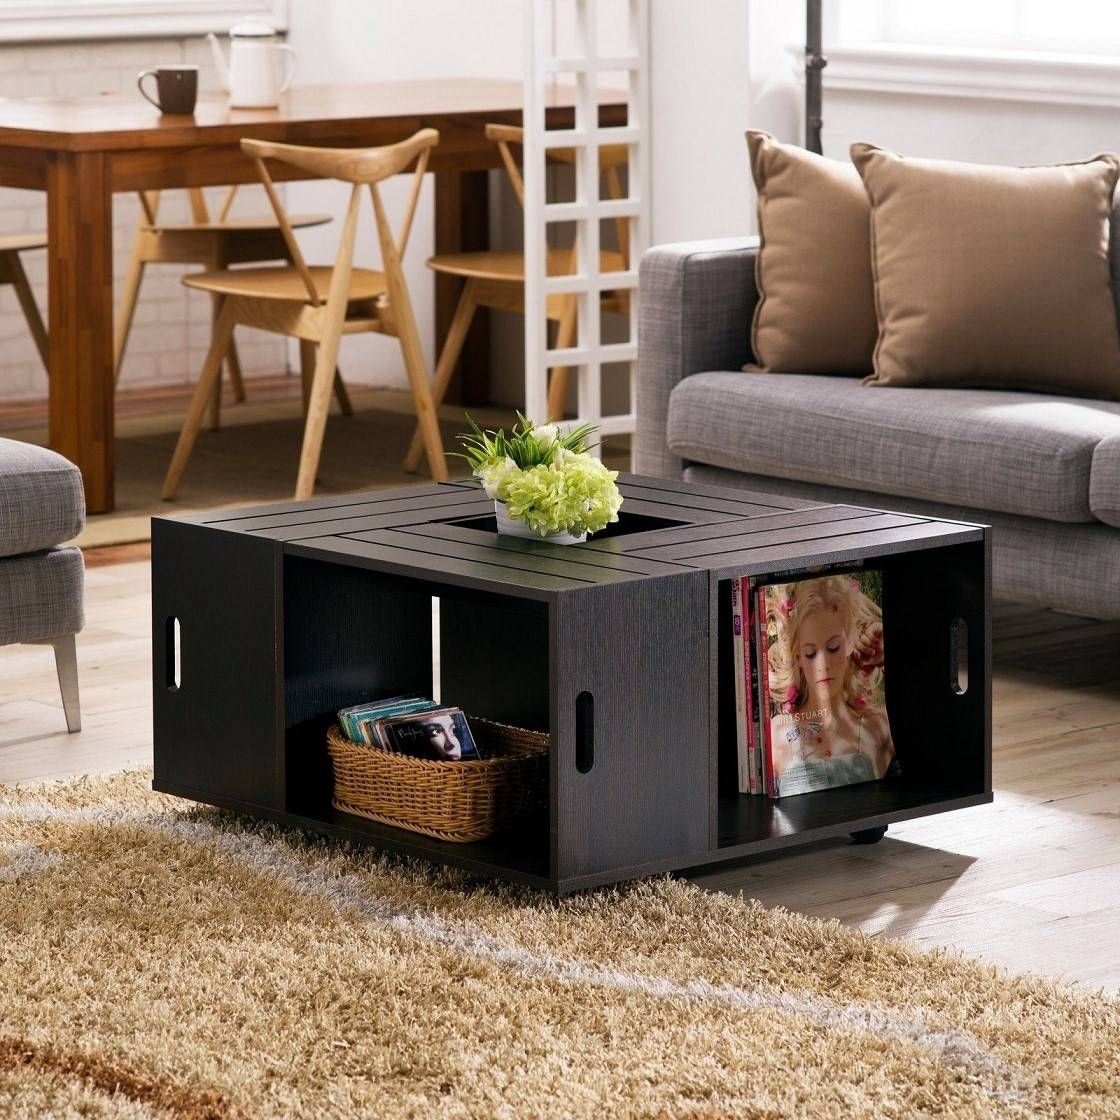 Coffee Table: Small Coffee Table With Storage Ideas Modern Coffee Regarding Square Wood Coffee Tables With Storage (View 26 of 30)